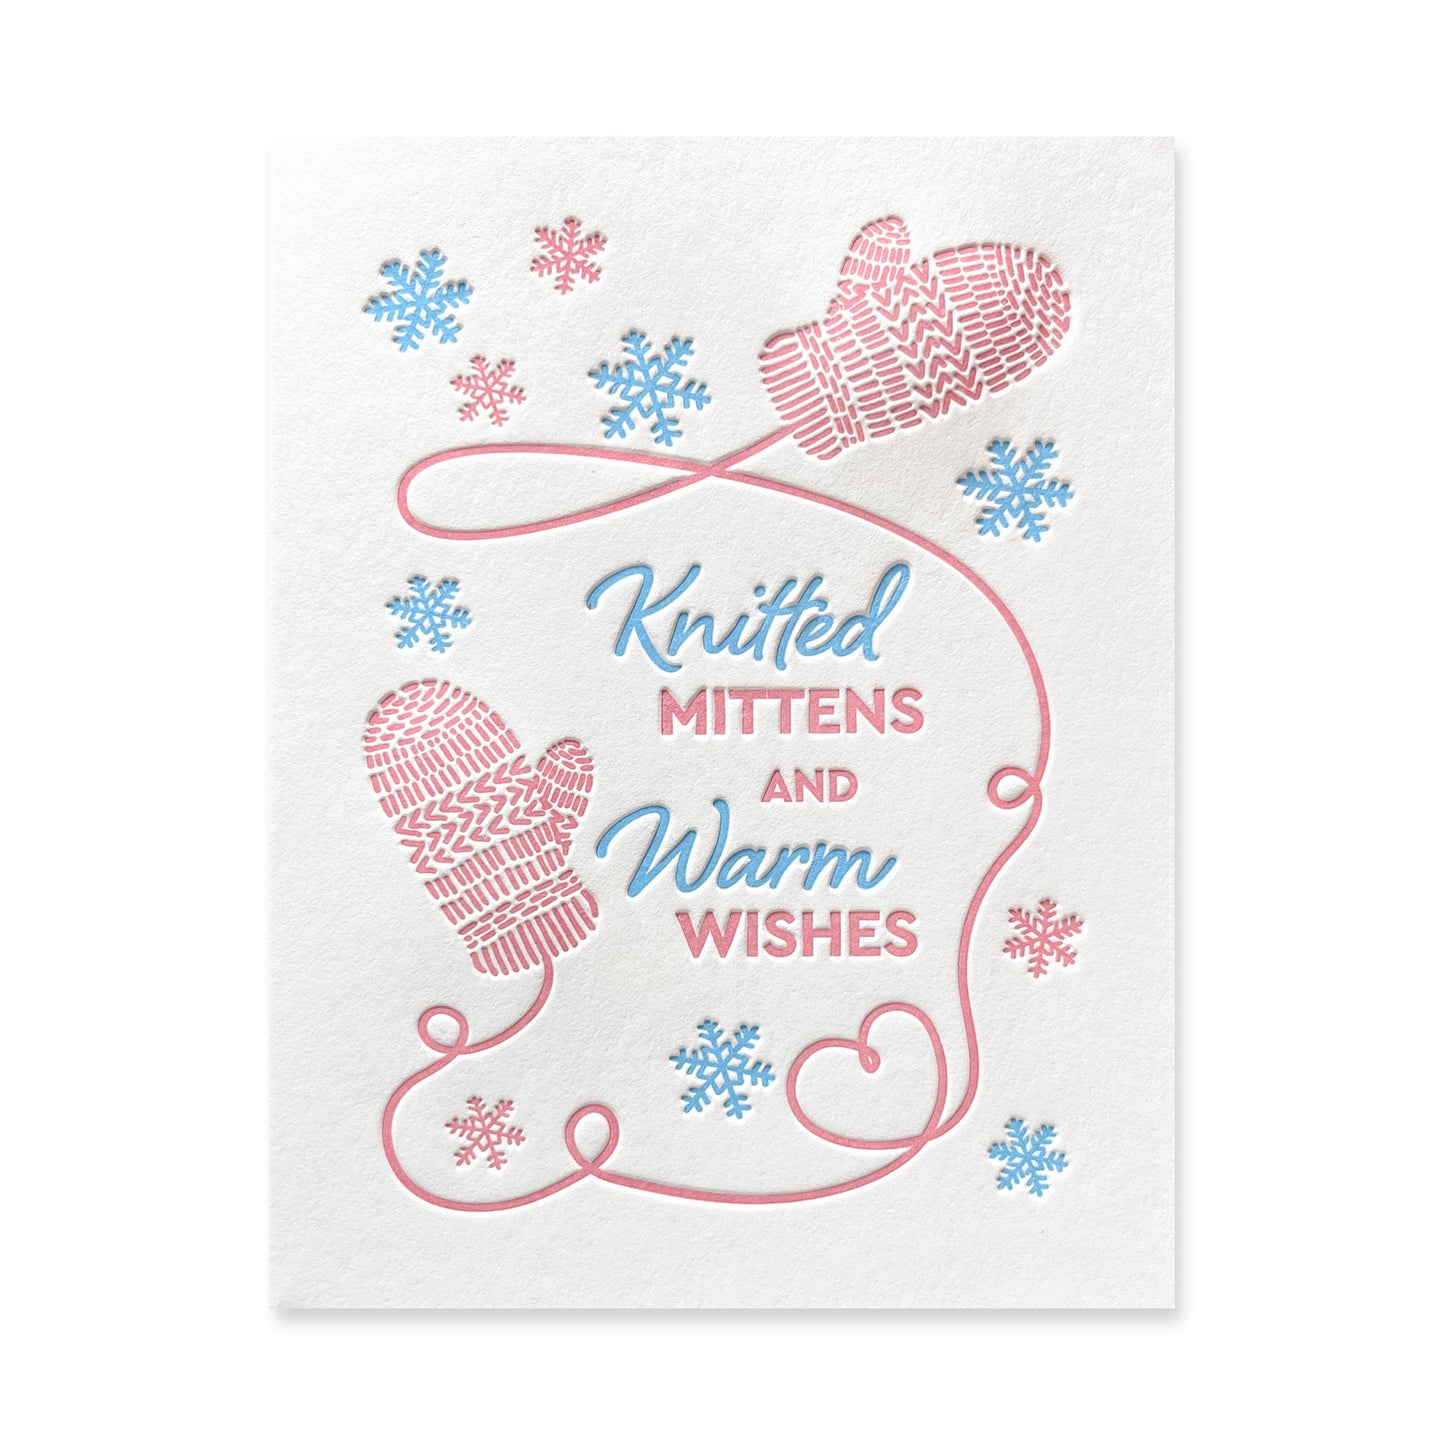 Knitted Mittens Letterpress Card (Set of 5)